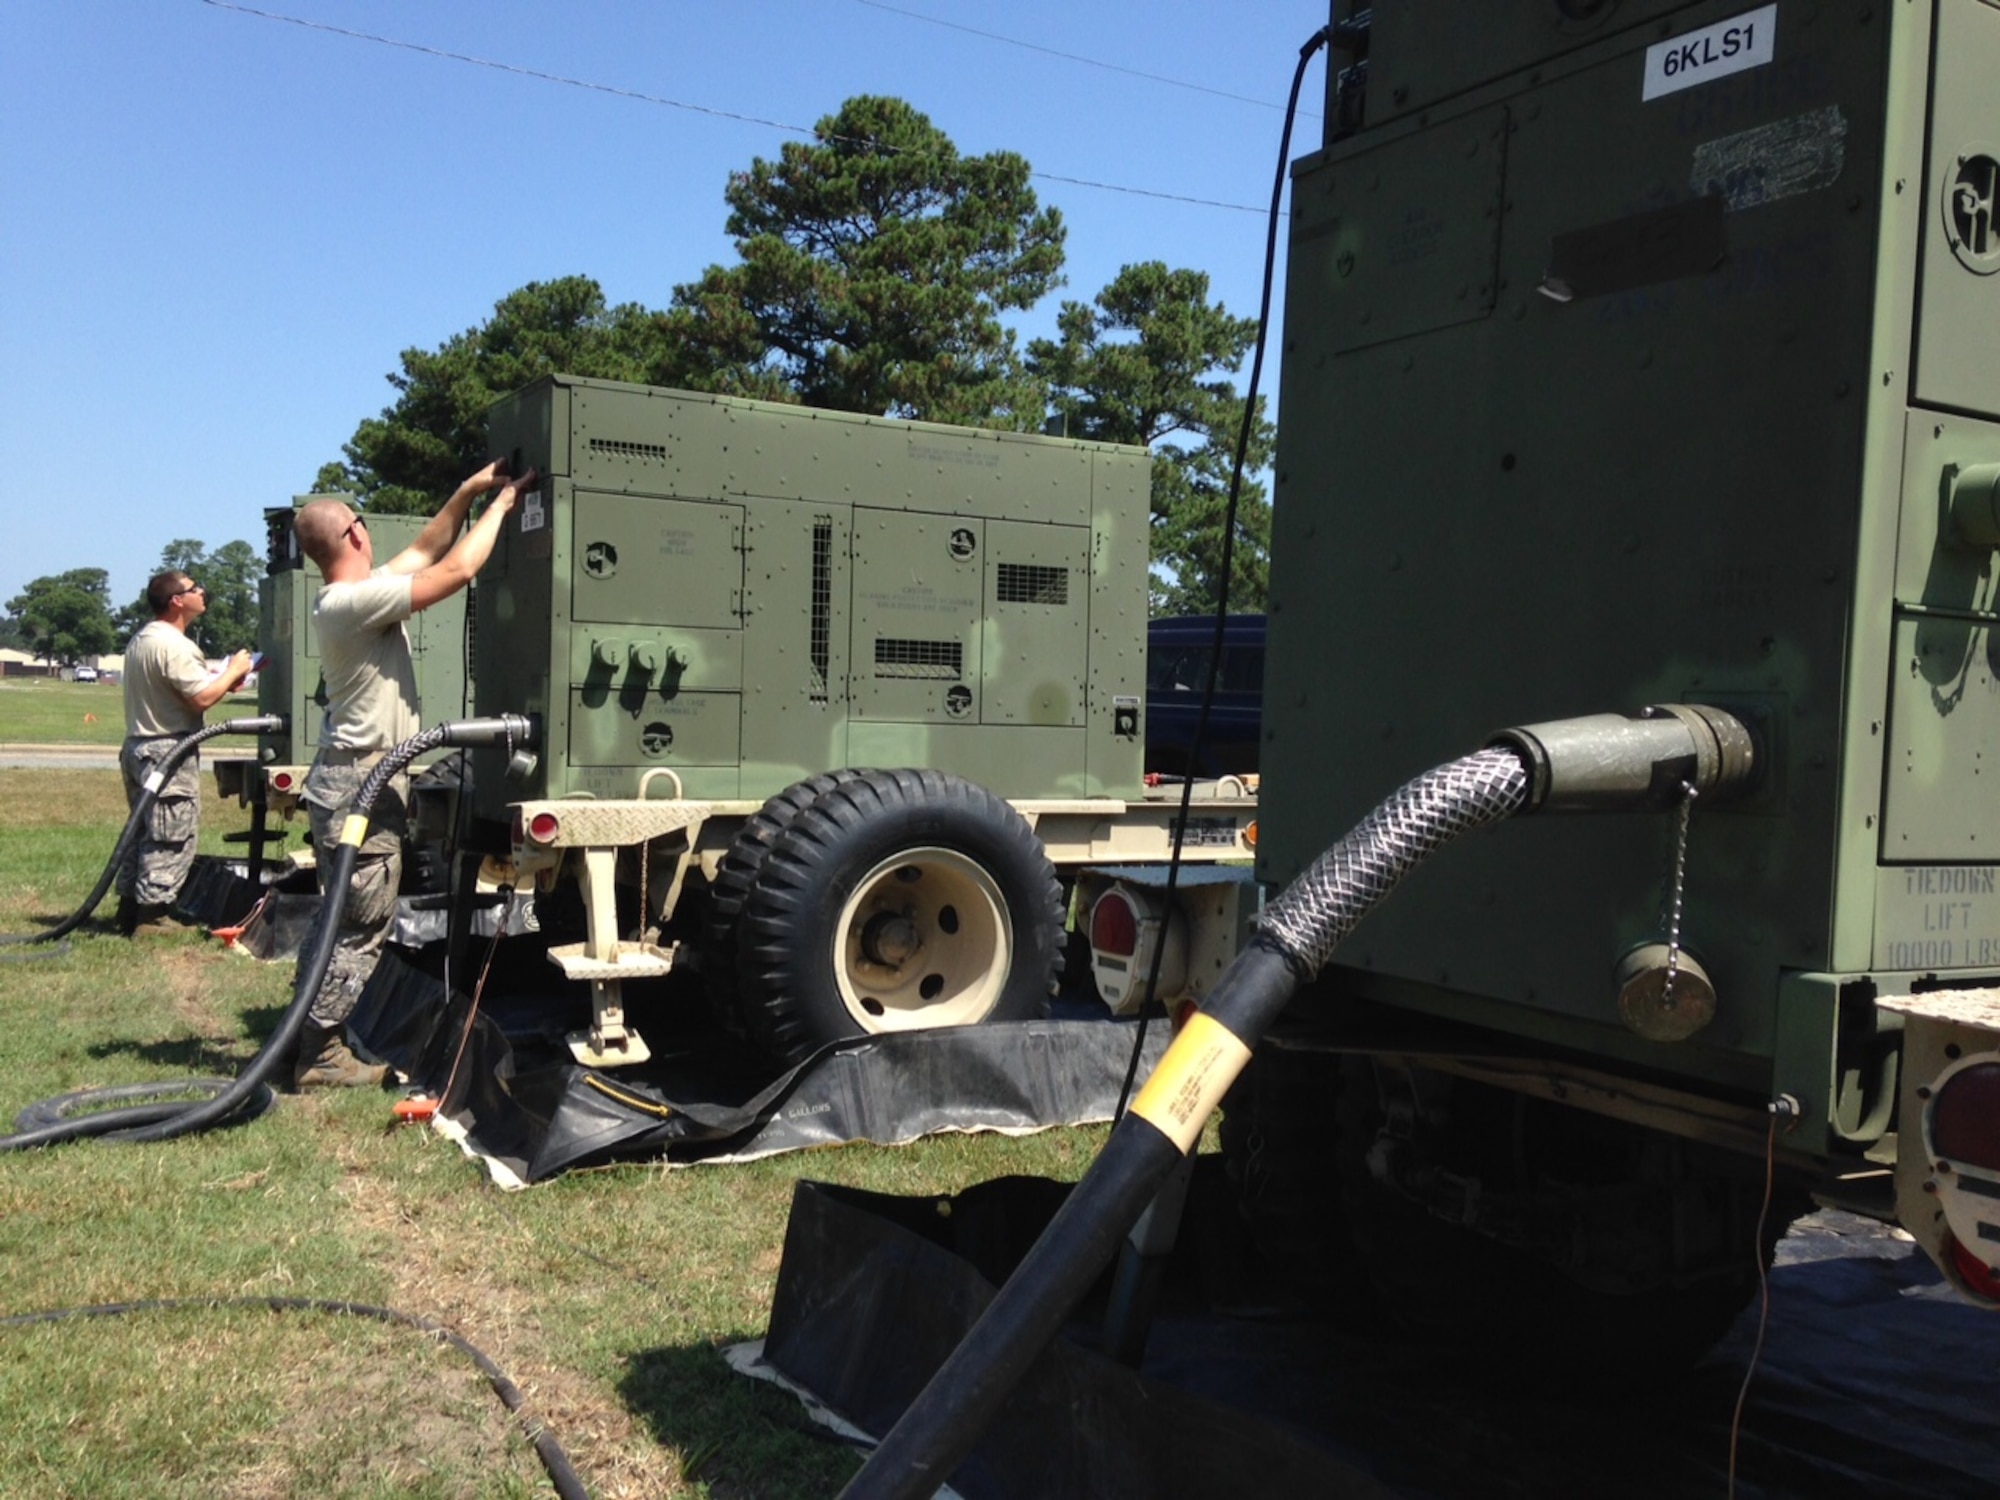 U.S. Air Force Senior Airman Tyler Morton of Mooresville, N.C. and Staff Sgt. Chris Wallace of Greenville, N.C. power production technicians for the 263rd Combat Communications Squadron, New London, N.C. monitor critical systems on a bank of electric generators June 15, 2015 at Seymour Johnson Air Force Base, Goldsboro, N.C. The airmen and their team set up the generators to power the unit's sophisticated communications gear and climate-control equipment during exercise "Medusa Rising," which tested their ability to supply communication services to customers when deployed. (U.S. Air Force photo by Lt. Col. Robert Carver, North Carolina Air National Guard Public Affairs/Released)